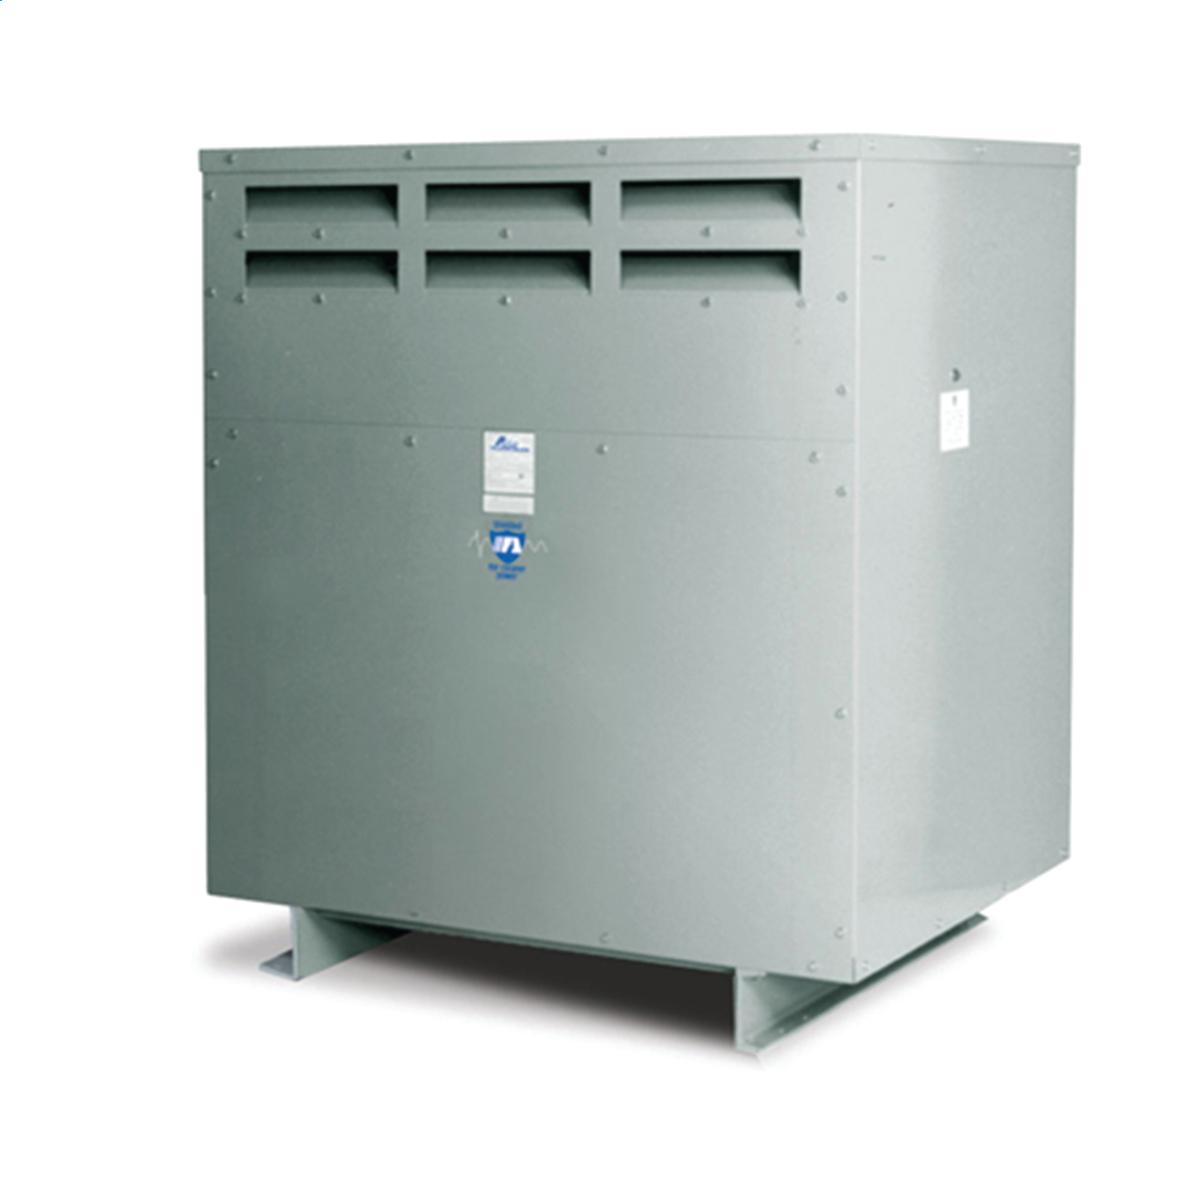 Hubbell WI001M27 Medium Voltage Transformer - Three Phase, 4800Δ - 600Y//347V, 1000kVA  ; Lower operating cost over Liquid-filled ; No additional fireproofing or venting ; Long life expectancy ; Smaller, lighter easy to maintain